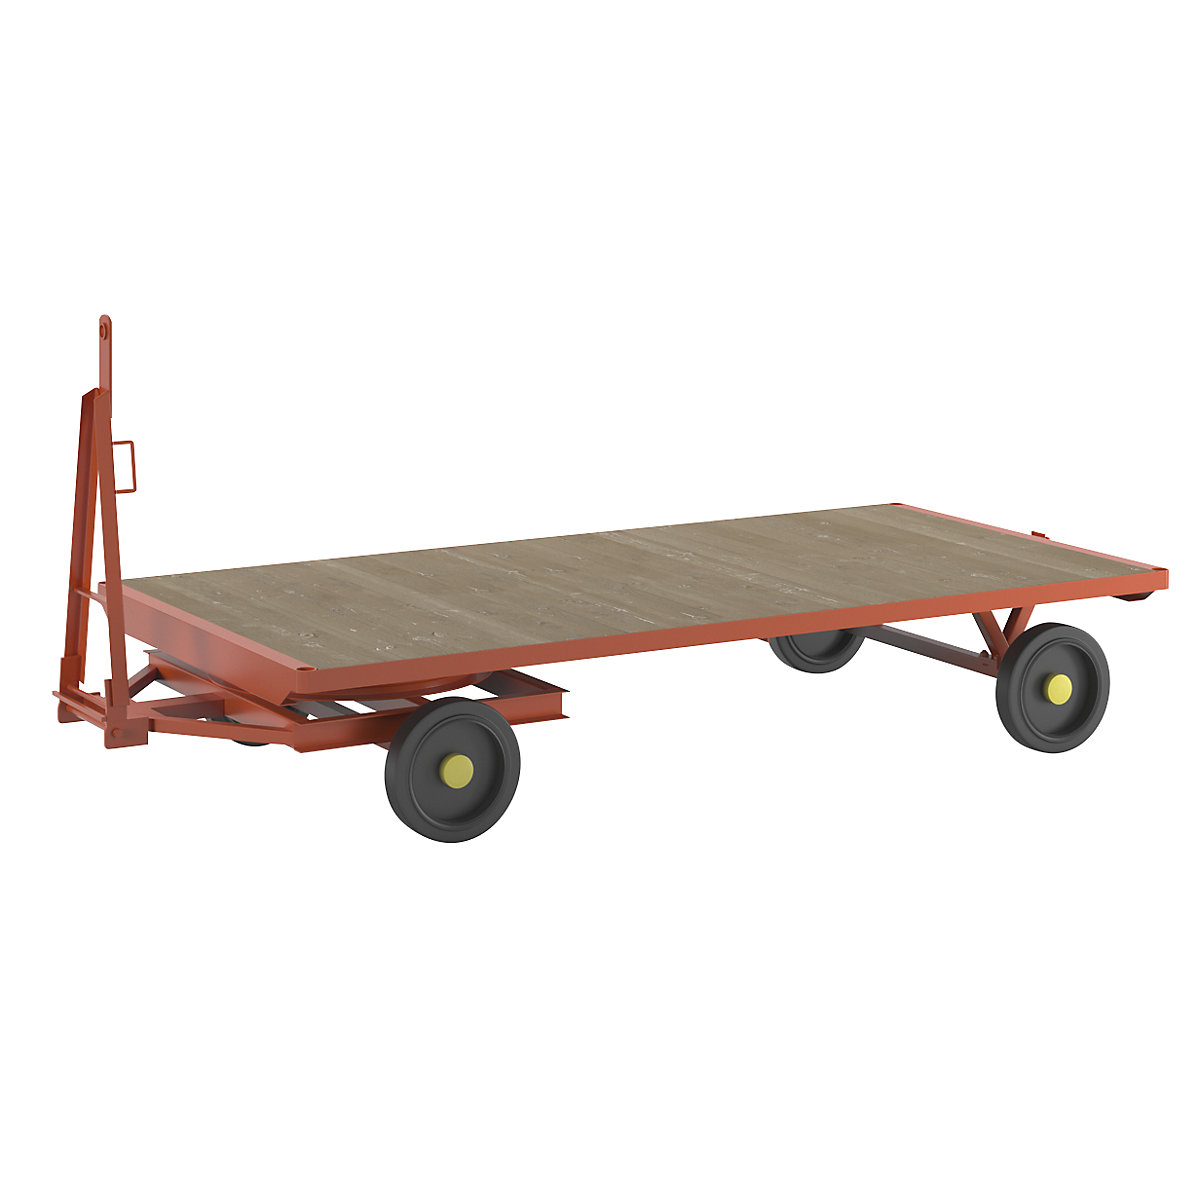 Trailer, 2-wheel turntable steering, max. load 2 t, platform 3.0 x 1.5 m, solid rubber tyres-4